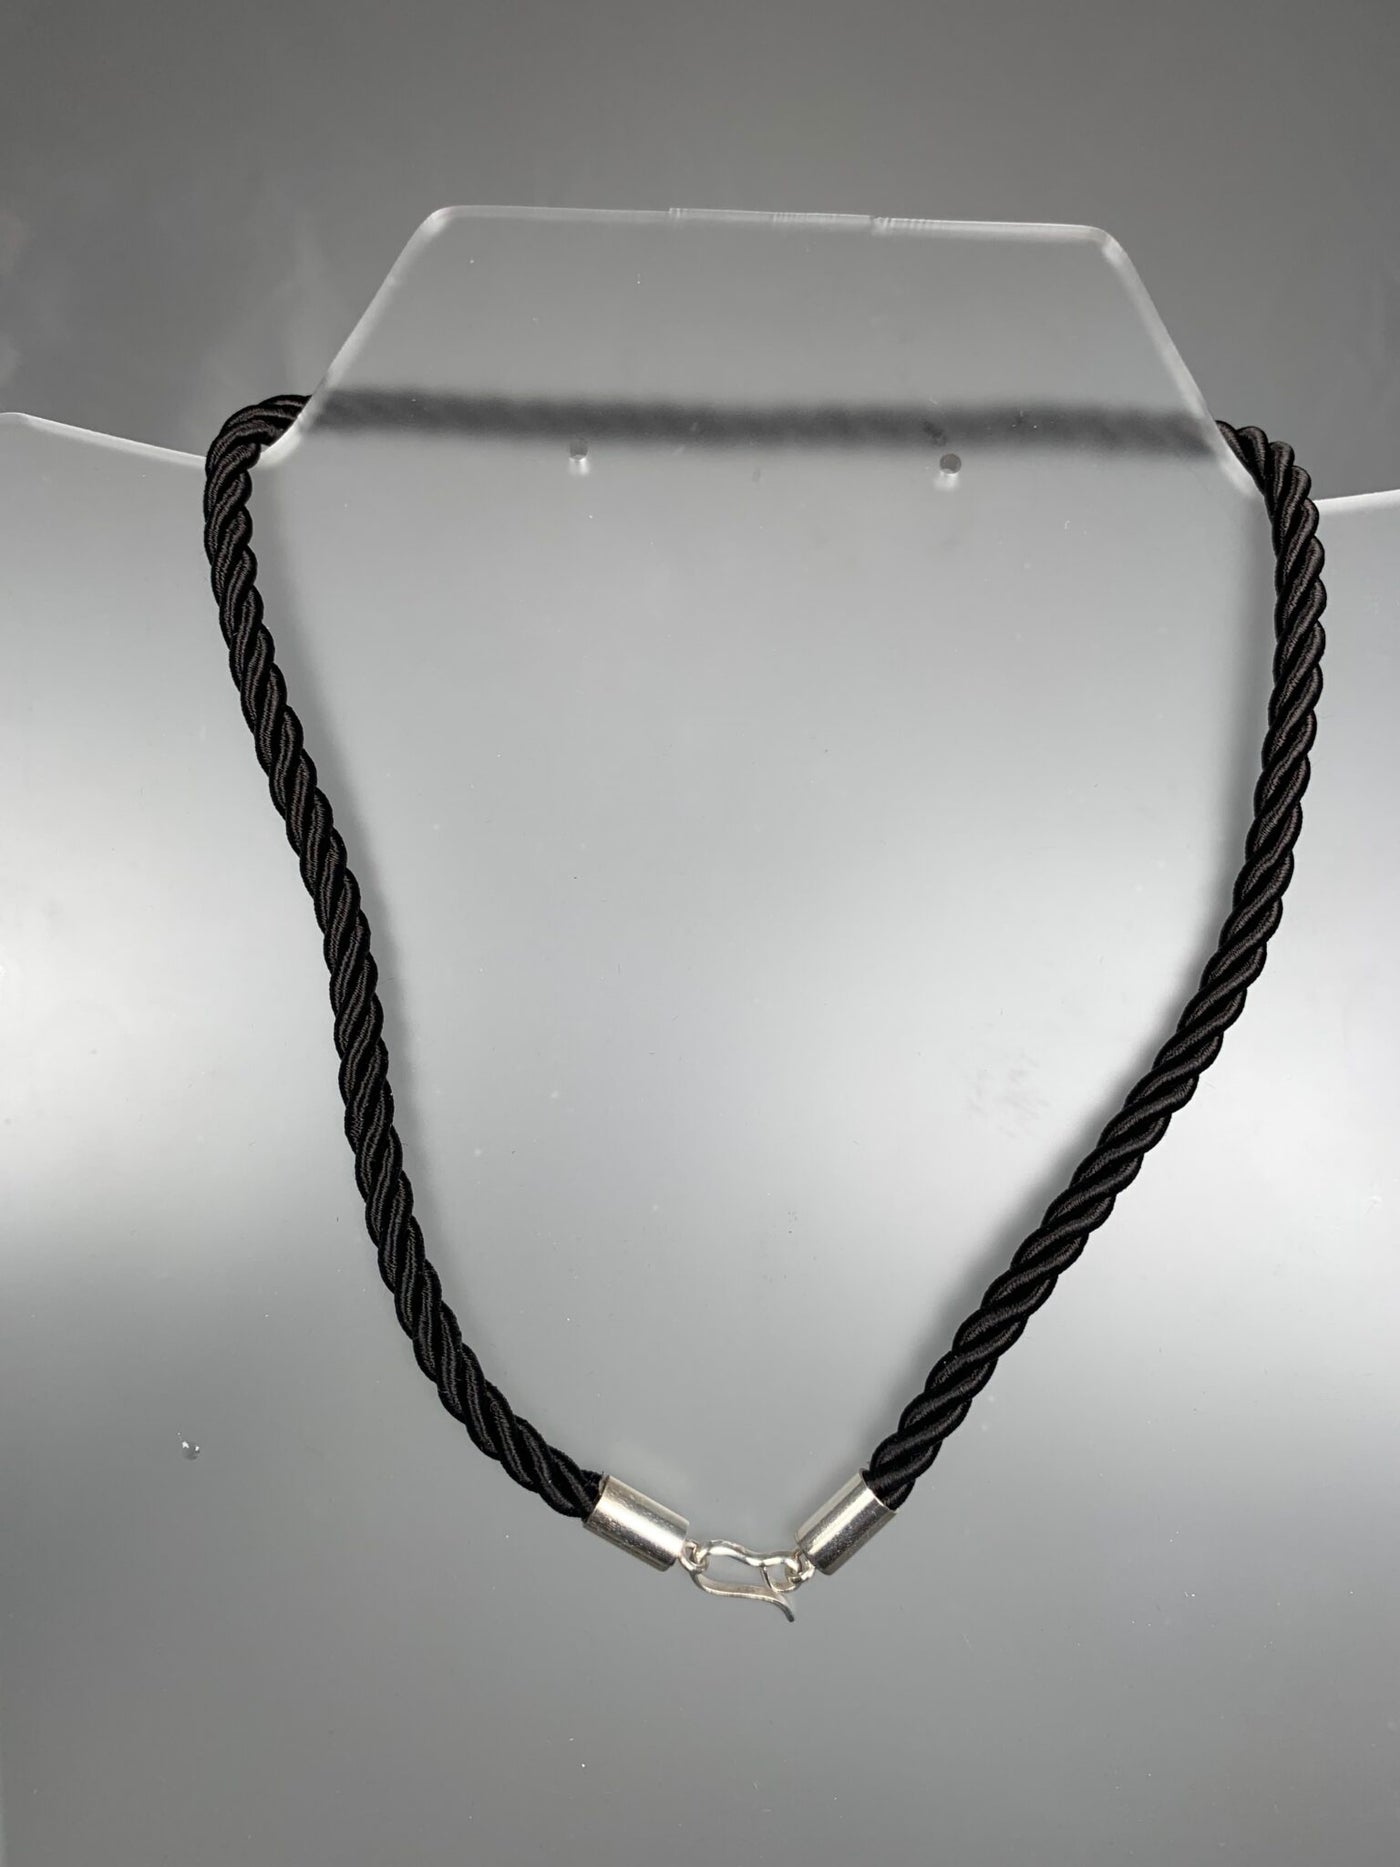 Sterling Silver Black 5mm Twist Cord Necklace 22"